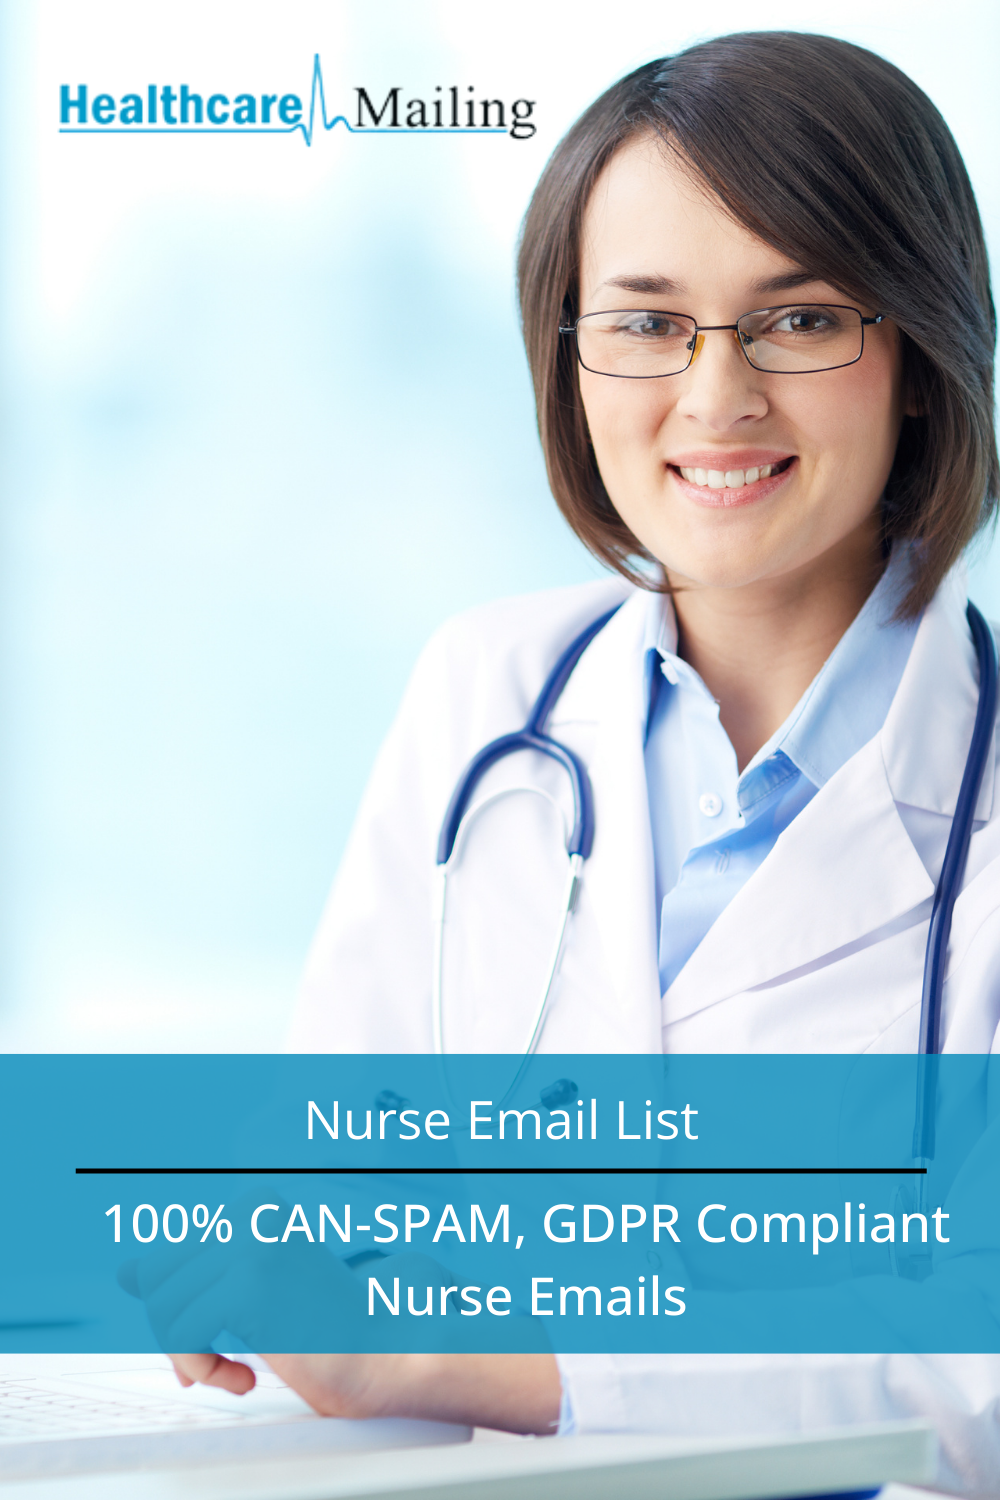 10 Ways to Promote Your Business Using a Nurse Email List